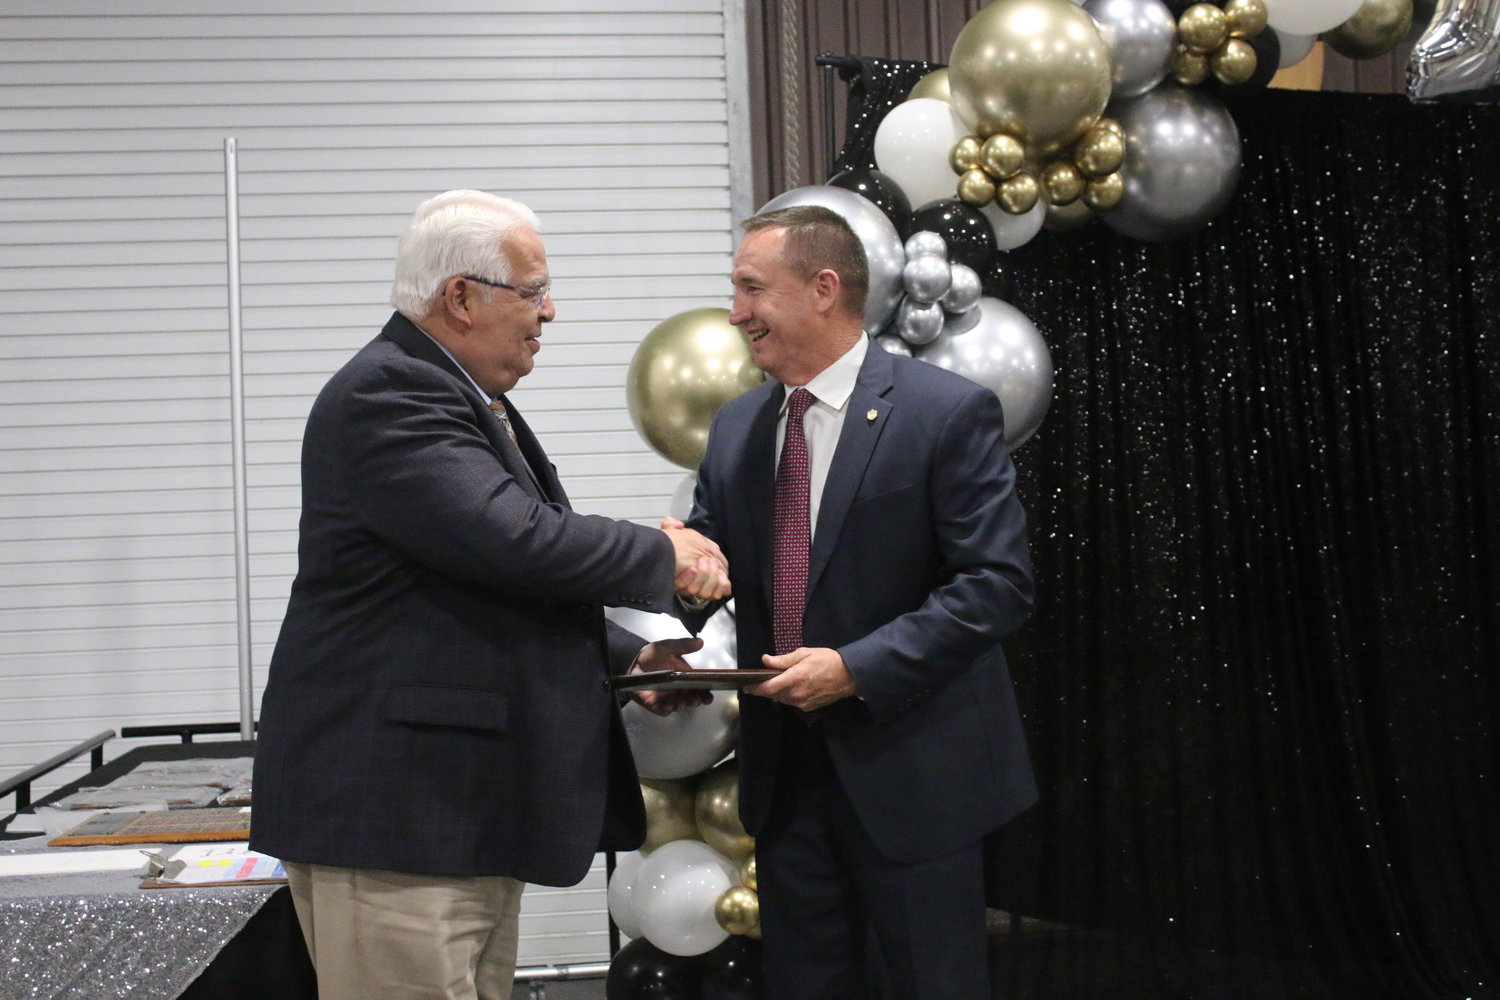 Andy Rodriguez, left, is congratulated by County Judge Patrick Davis for winning the David B. Walshak Lifetime Achievement Award from the Gonzales Chamber of Commerce & Agriculture at their 100th banquet Thursday, April 7, at JB Wells Expo Center.